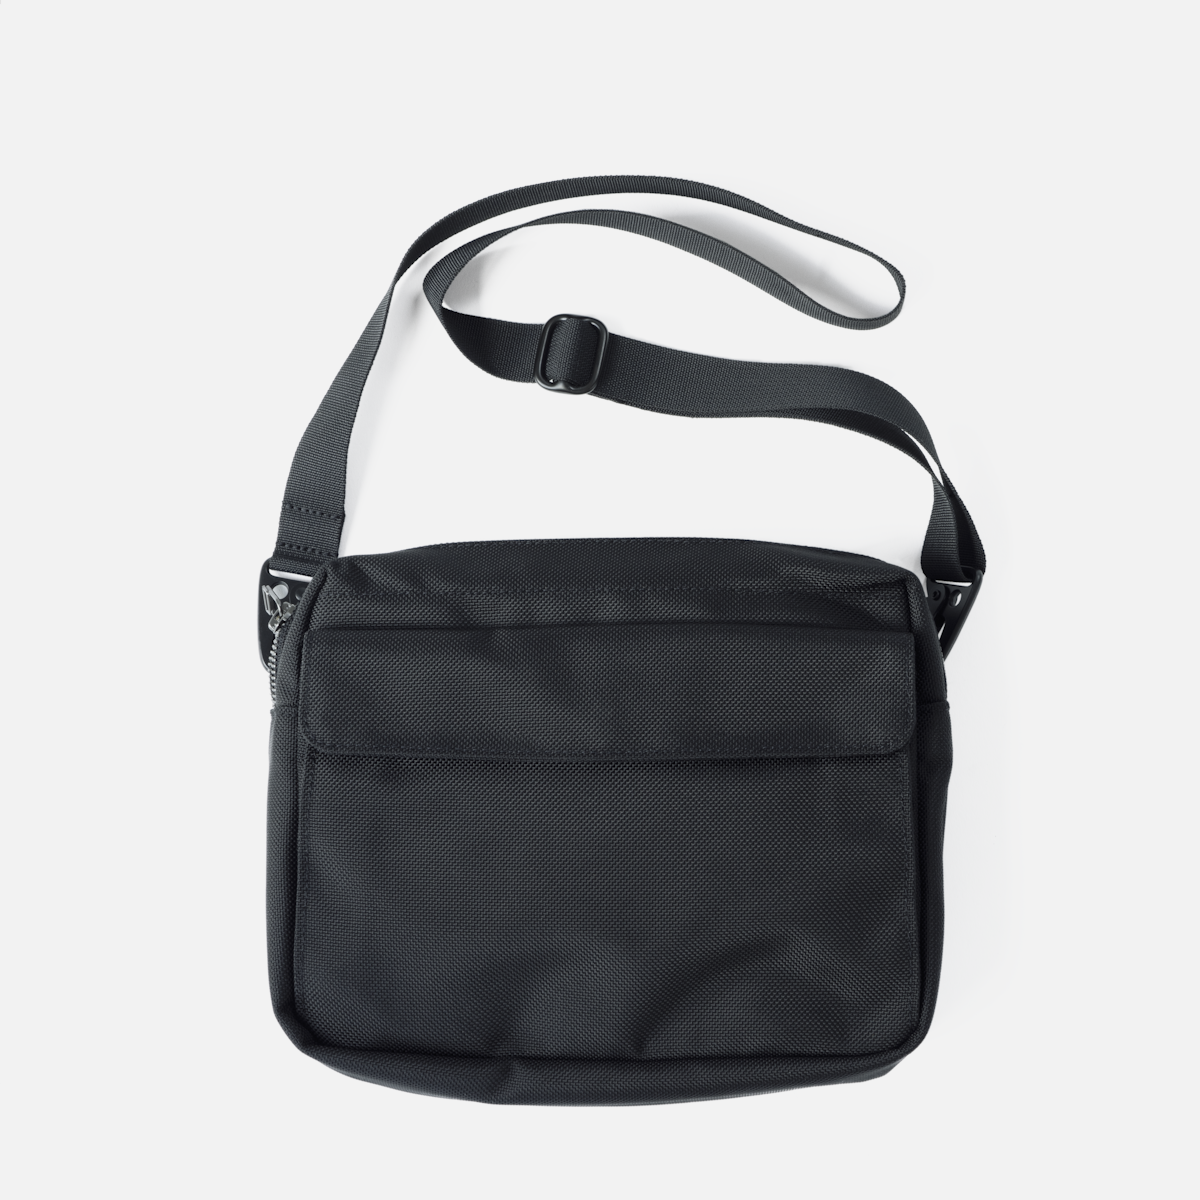 The blend coated crossbody bag, black, Lacoste